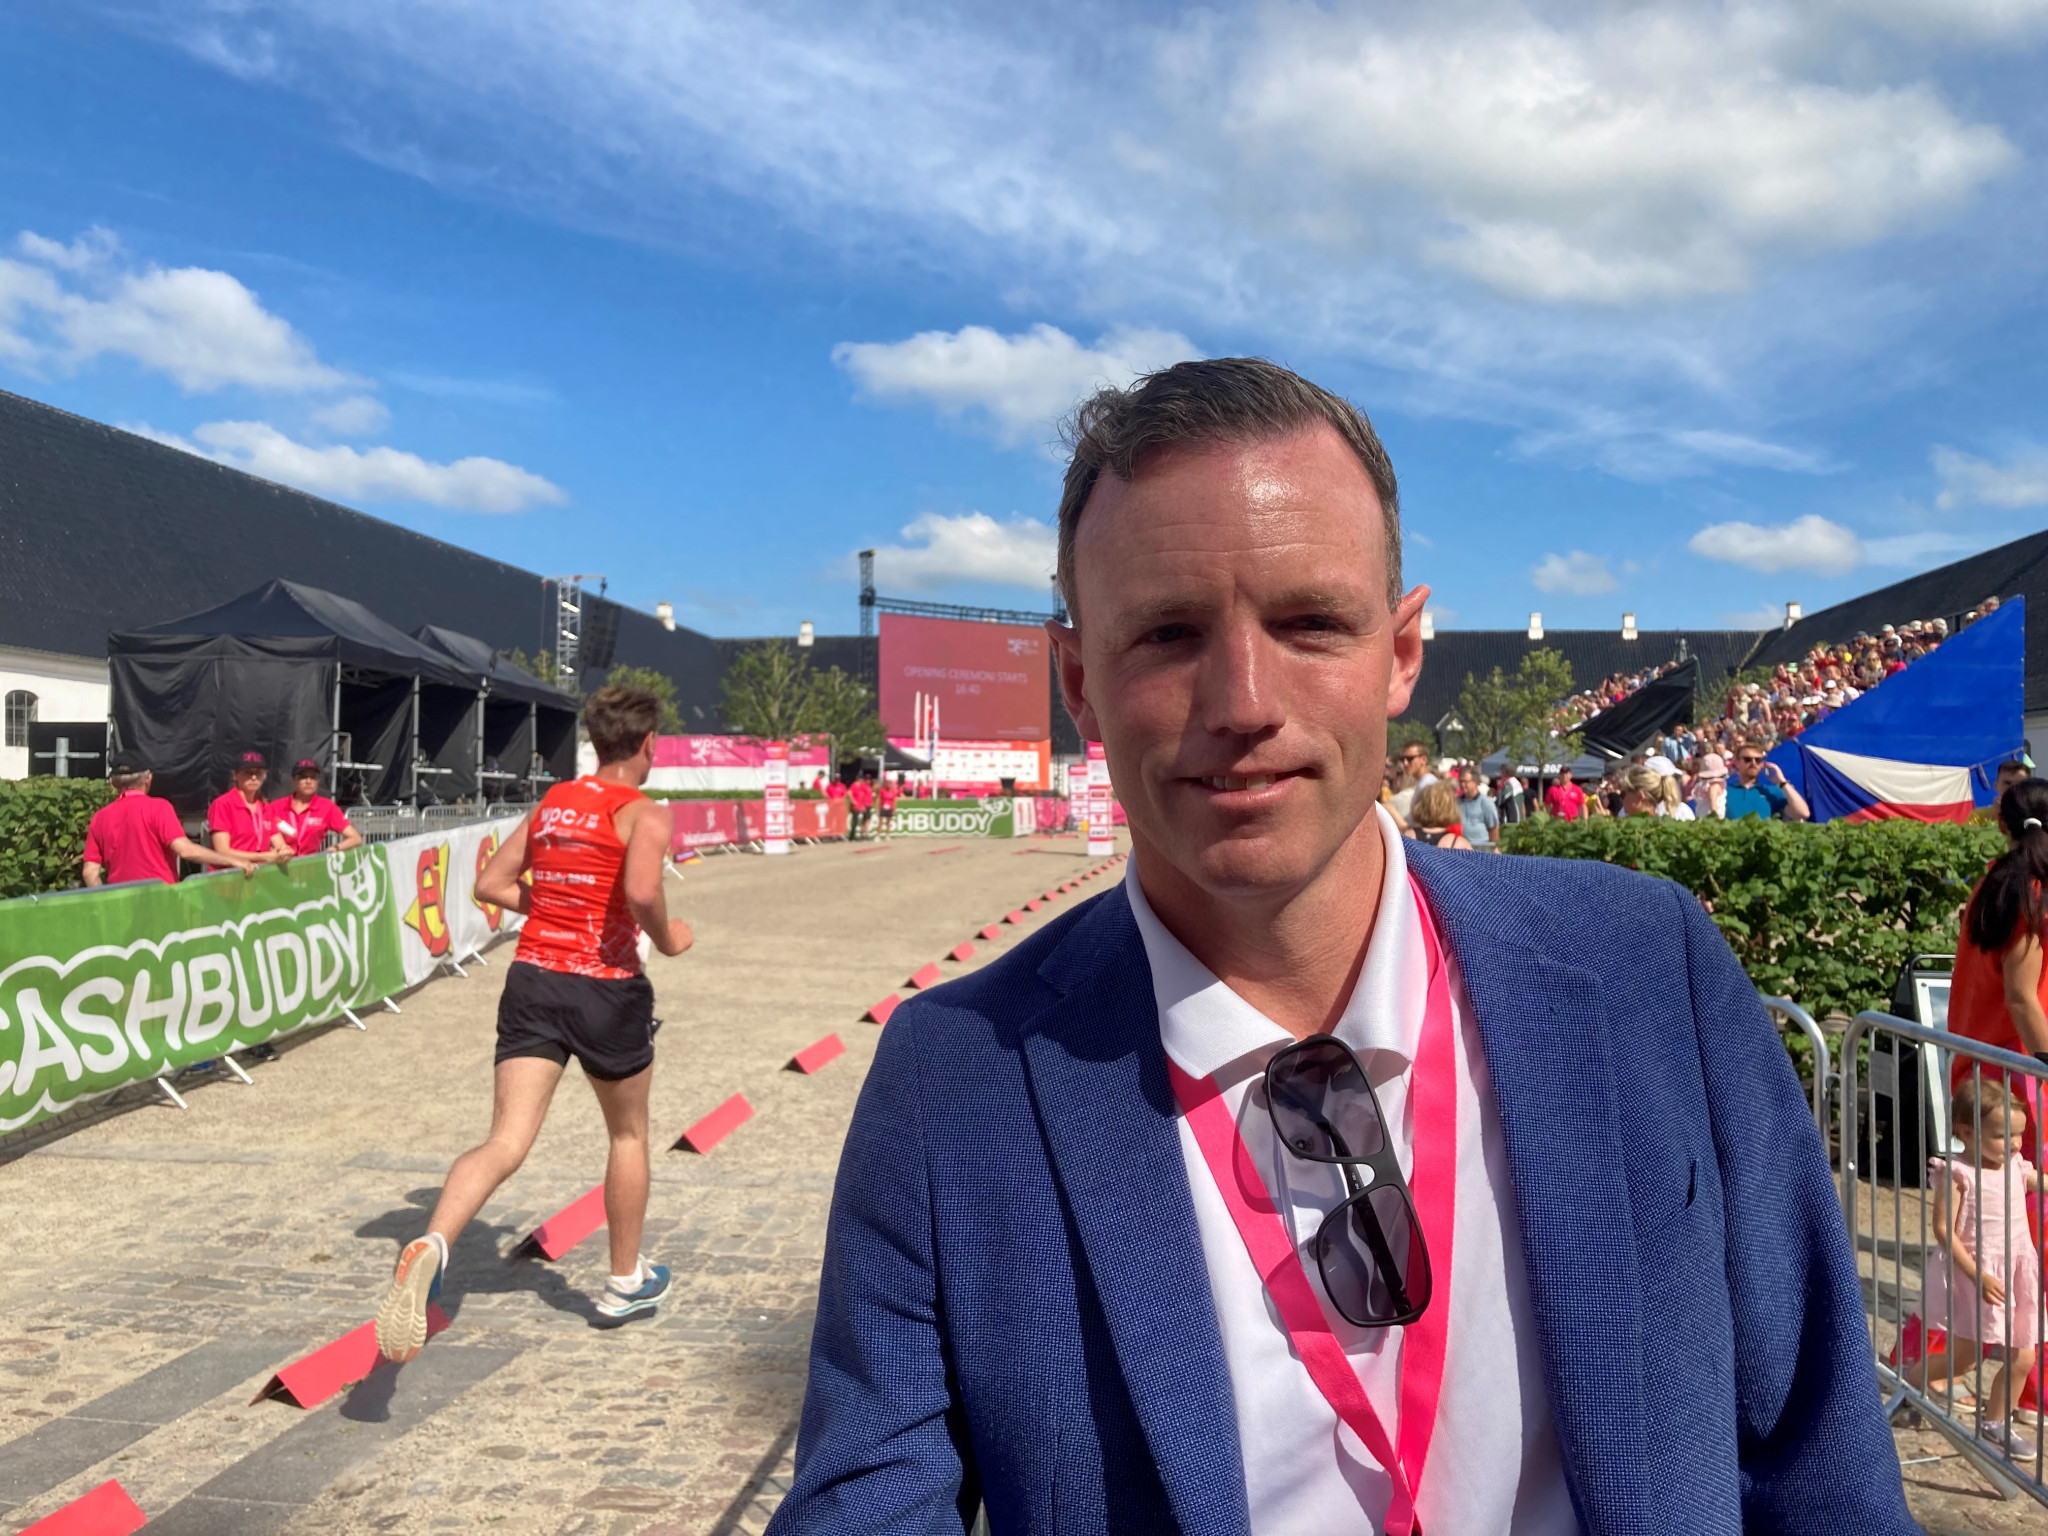 Thomas Kastrup, head of sport events for Triangle Events Denmark, is aiming to bring more major sporting competitions to the seven municipalities in the Triangle Region ©ITG